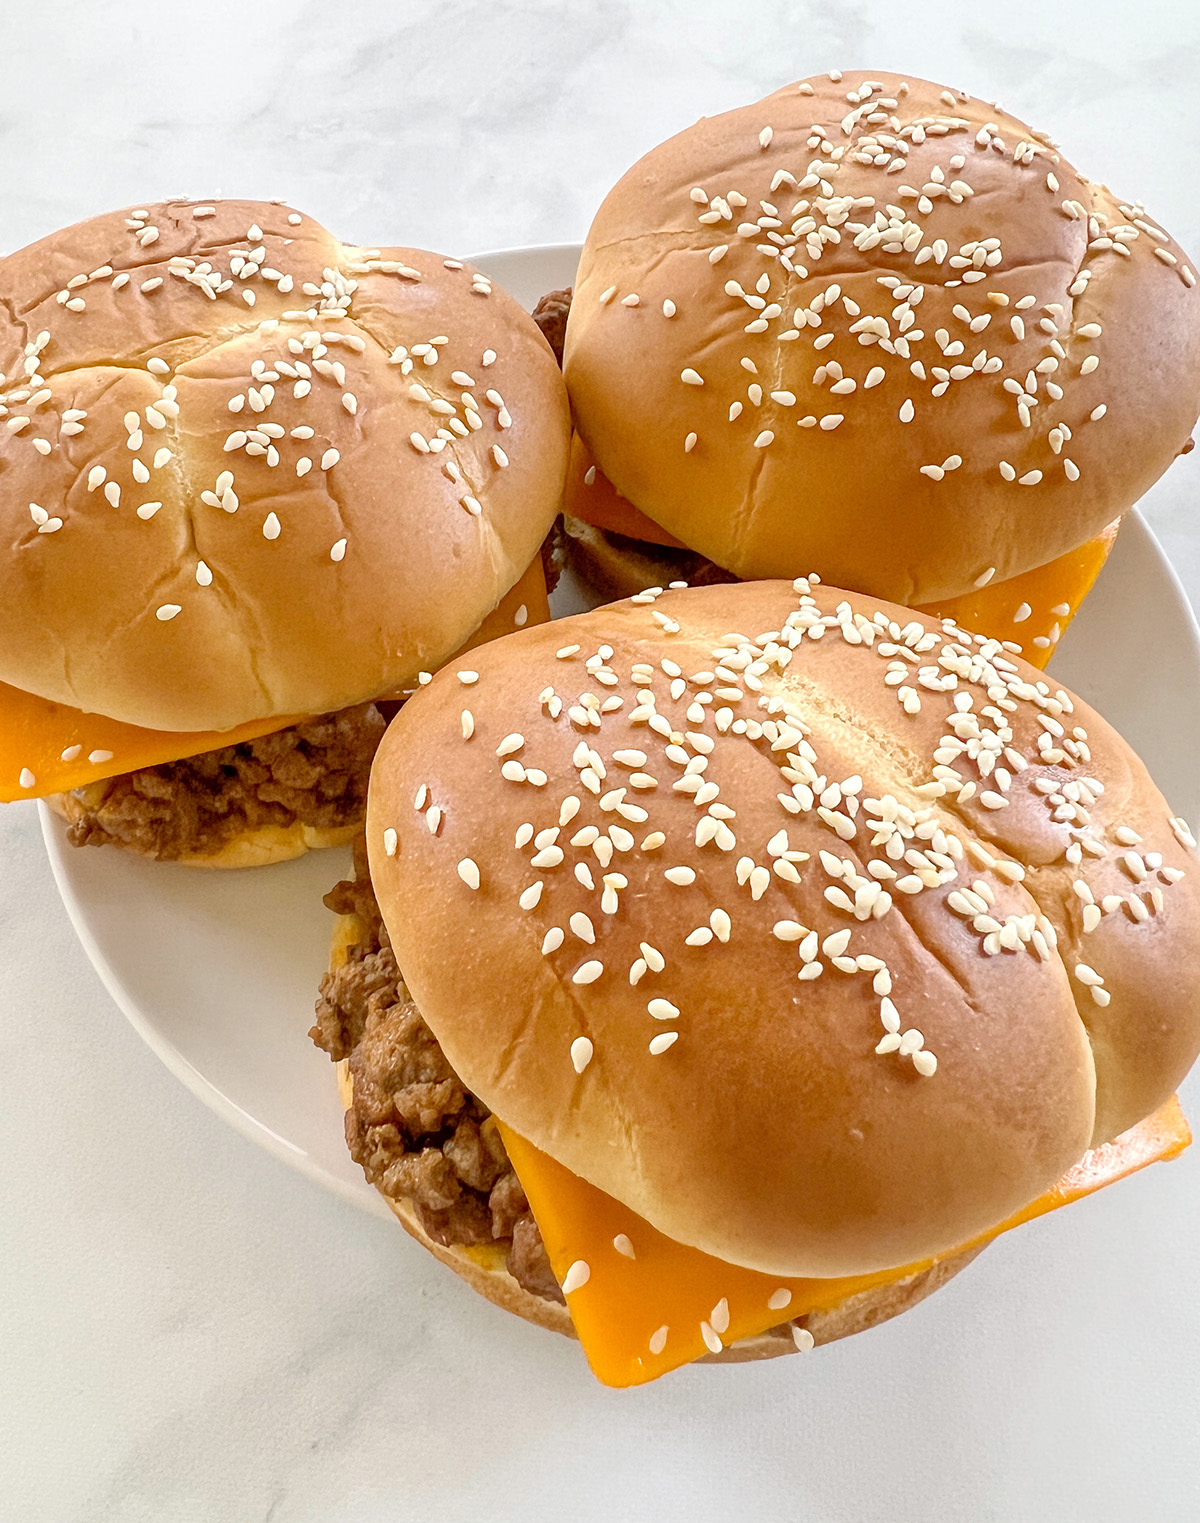 This is a photo of 3 ground beef sliders served on a white plate. 